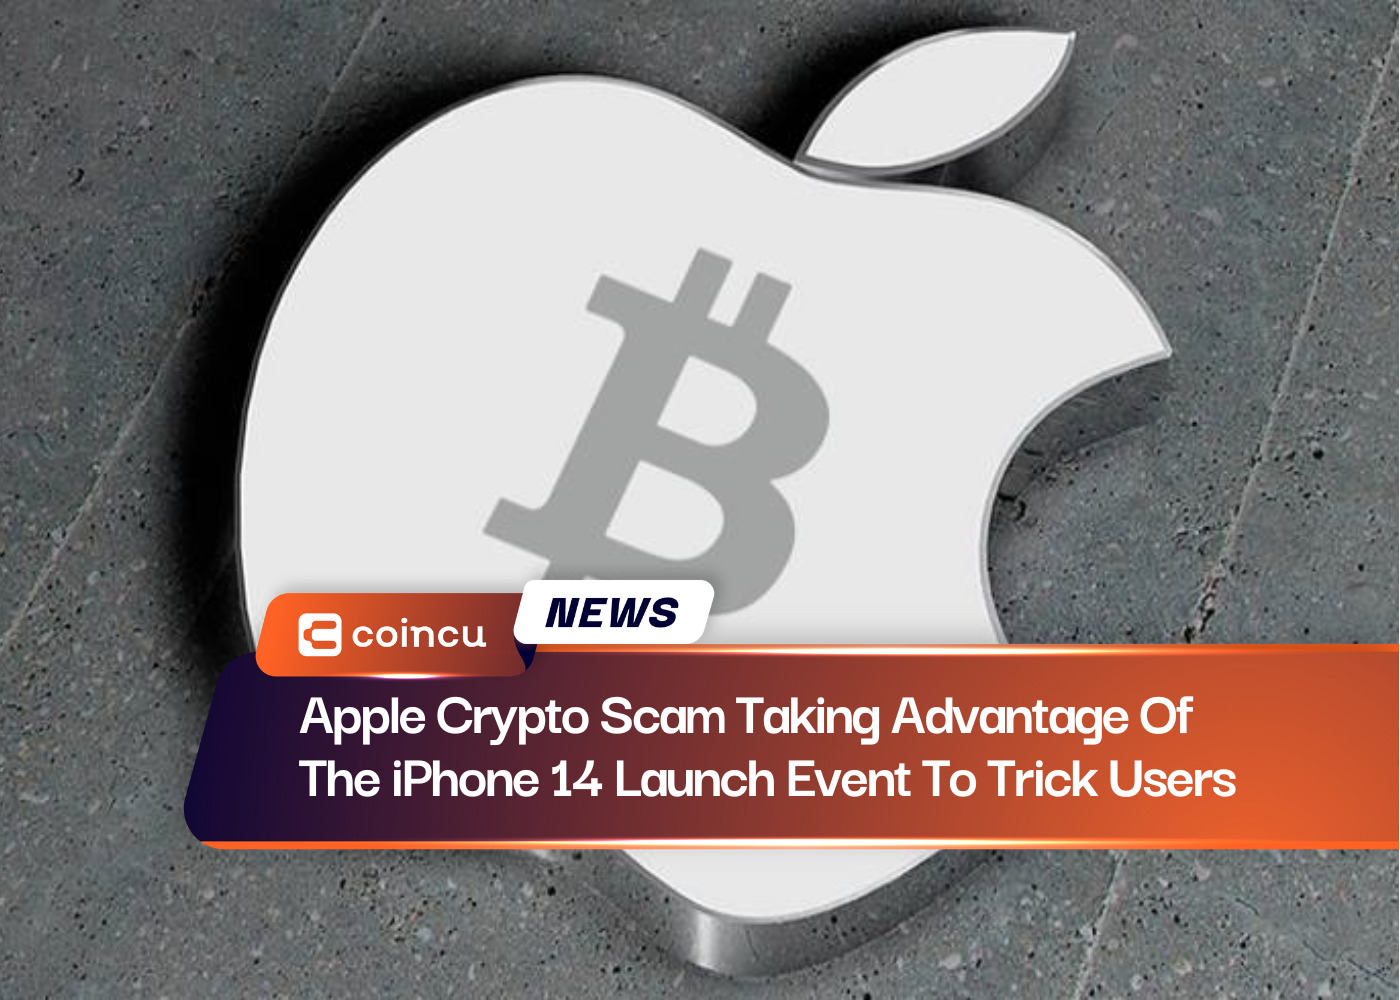 Apple Crypto Scam Taking Advantage Of The iPhone 14 Launch Event To Trick Users